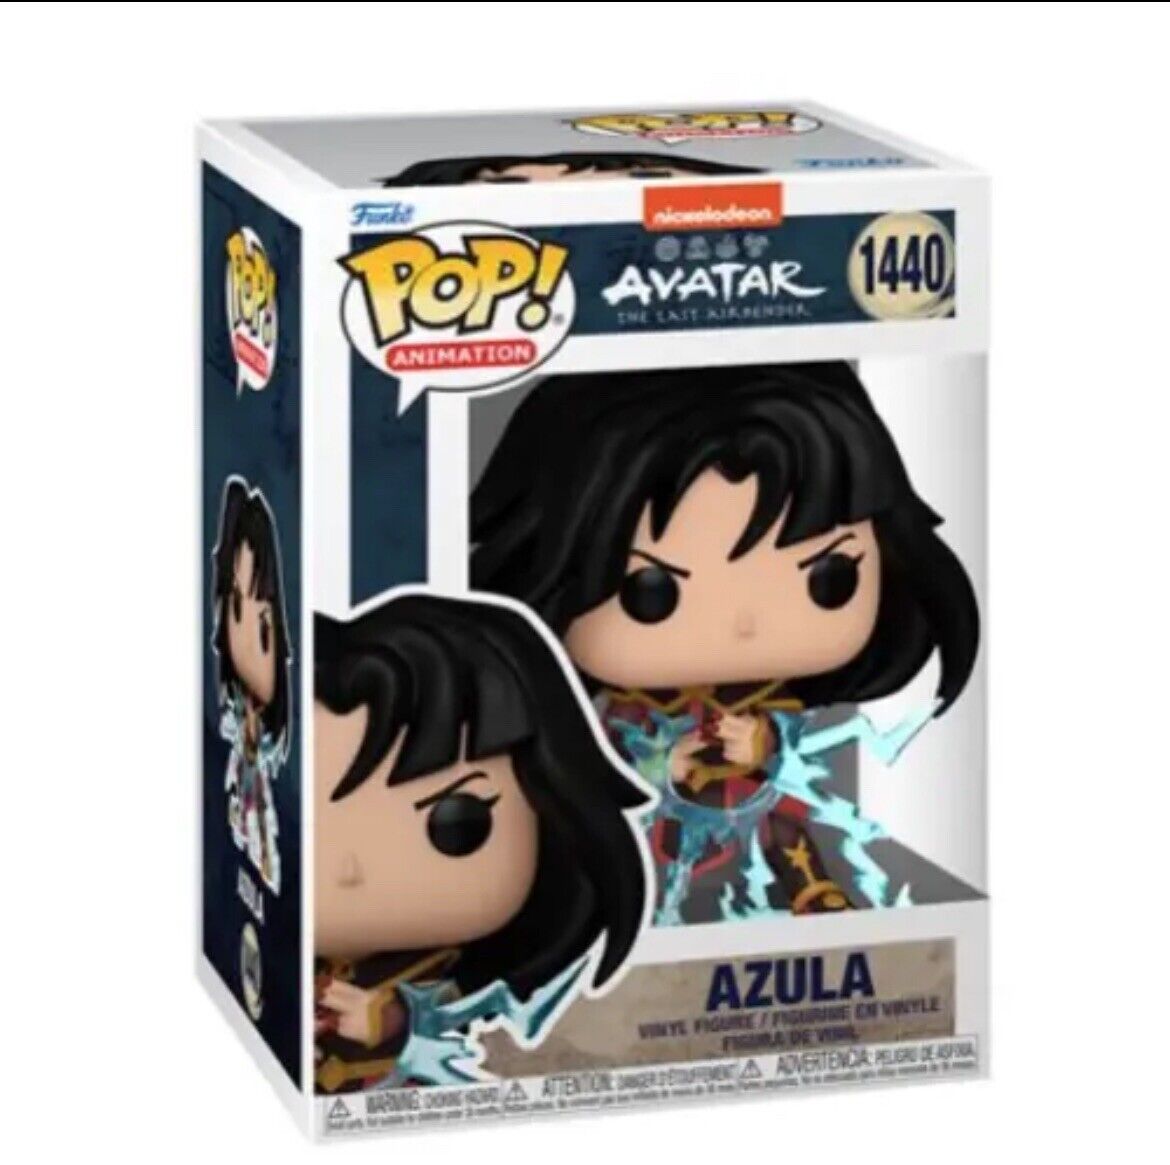 Funko Pop Avatar: The Last Airbender Azula with Lightning #1440 EE Exclusive